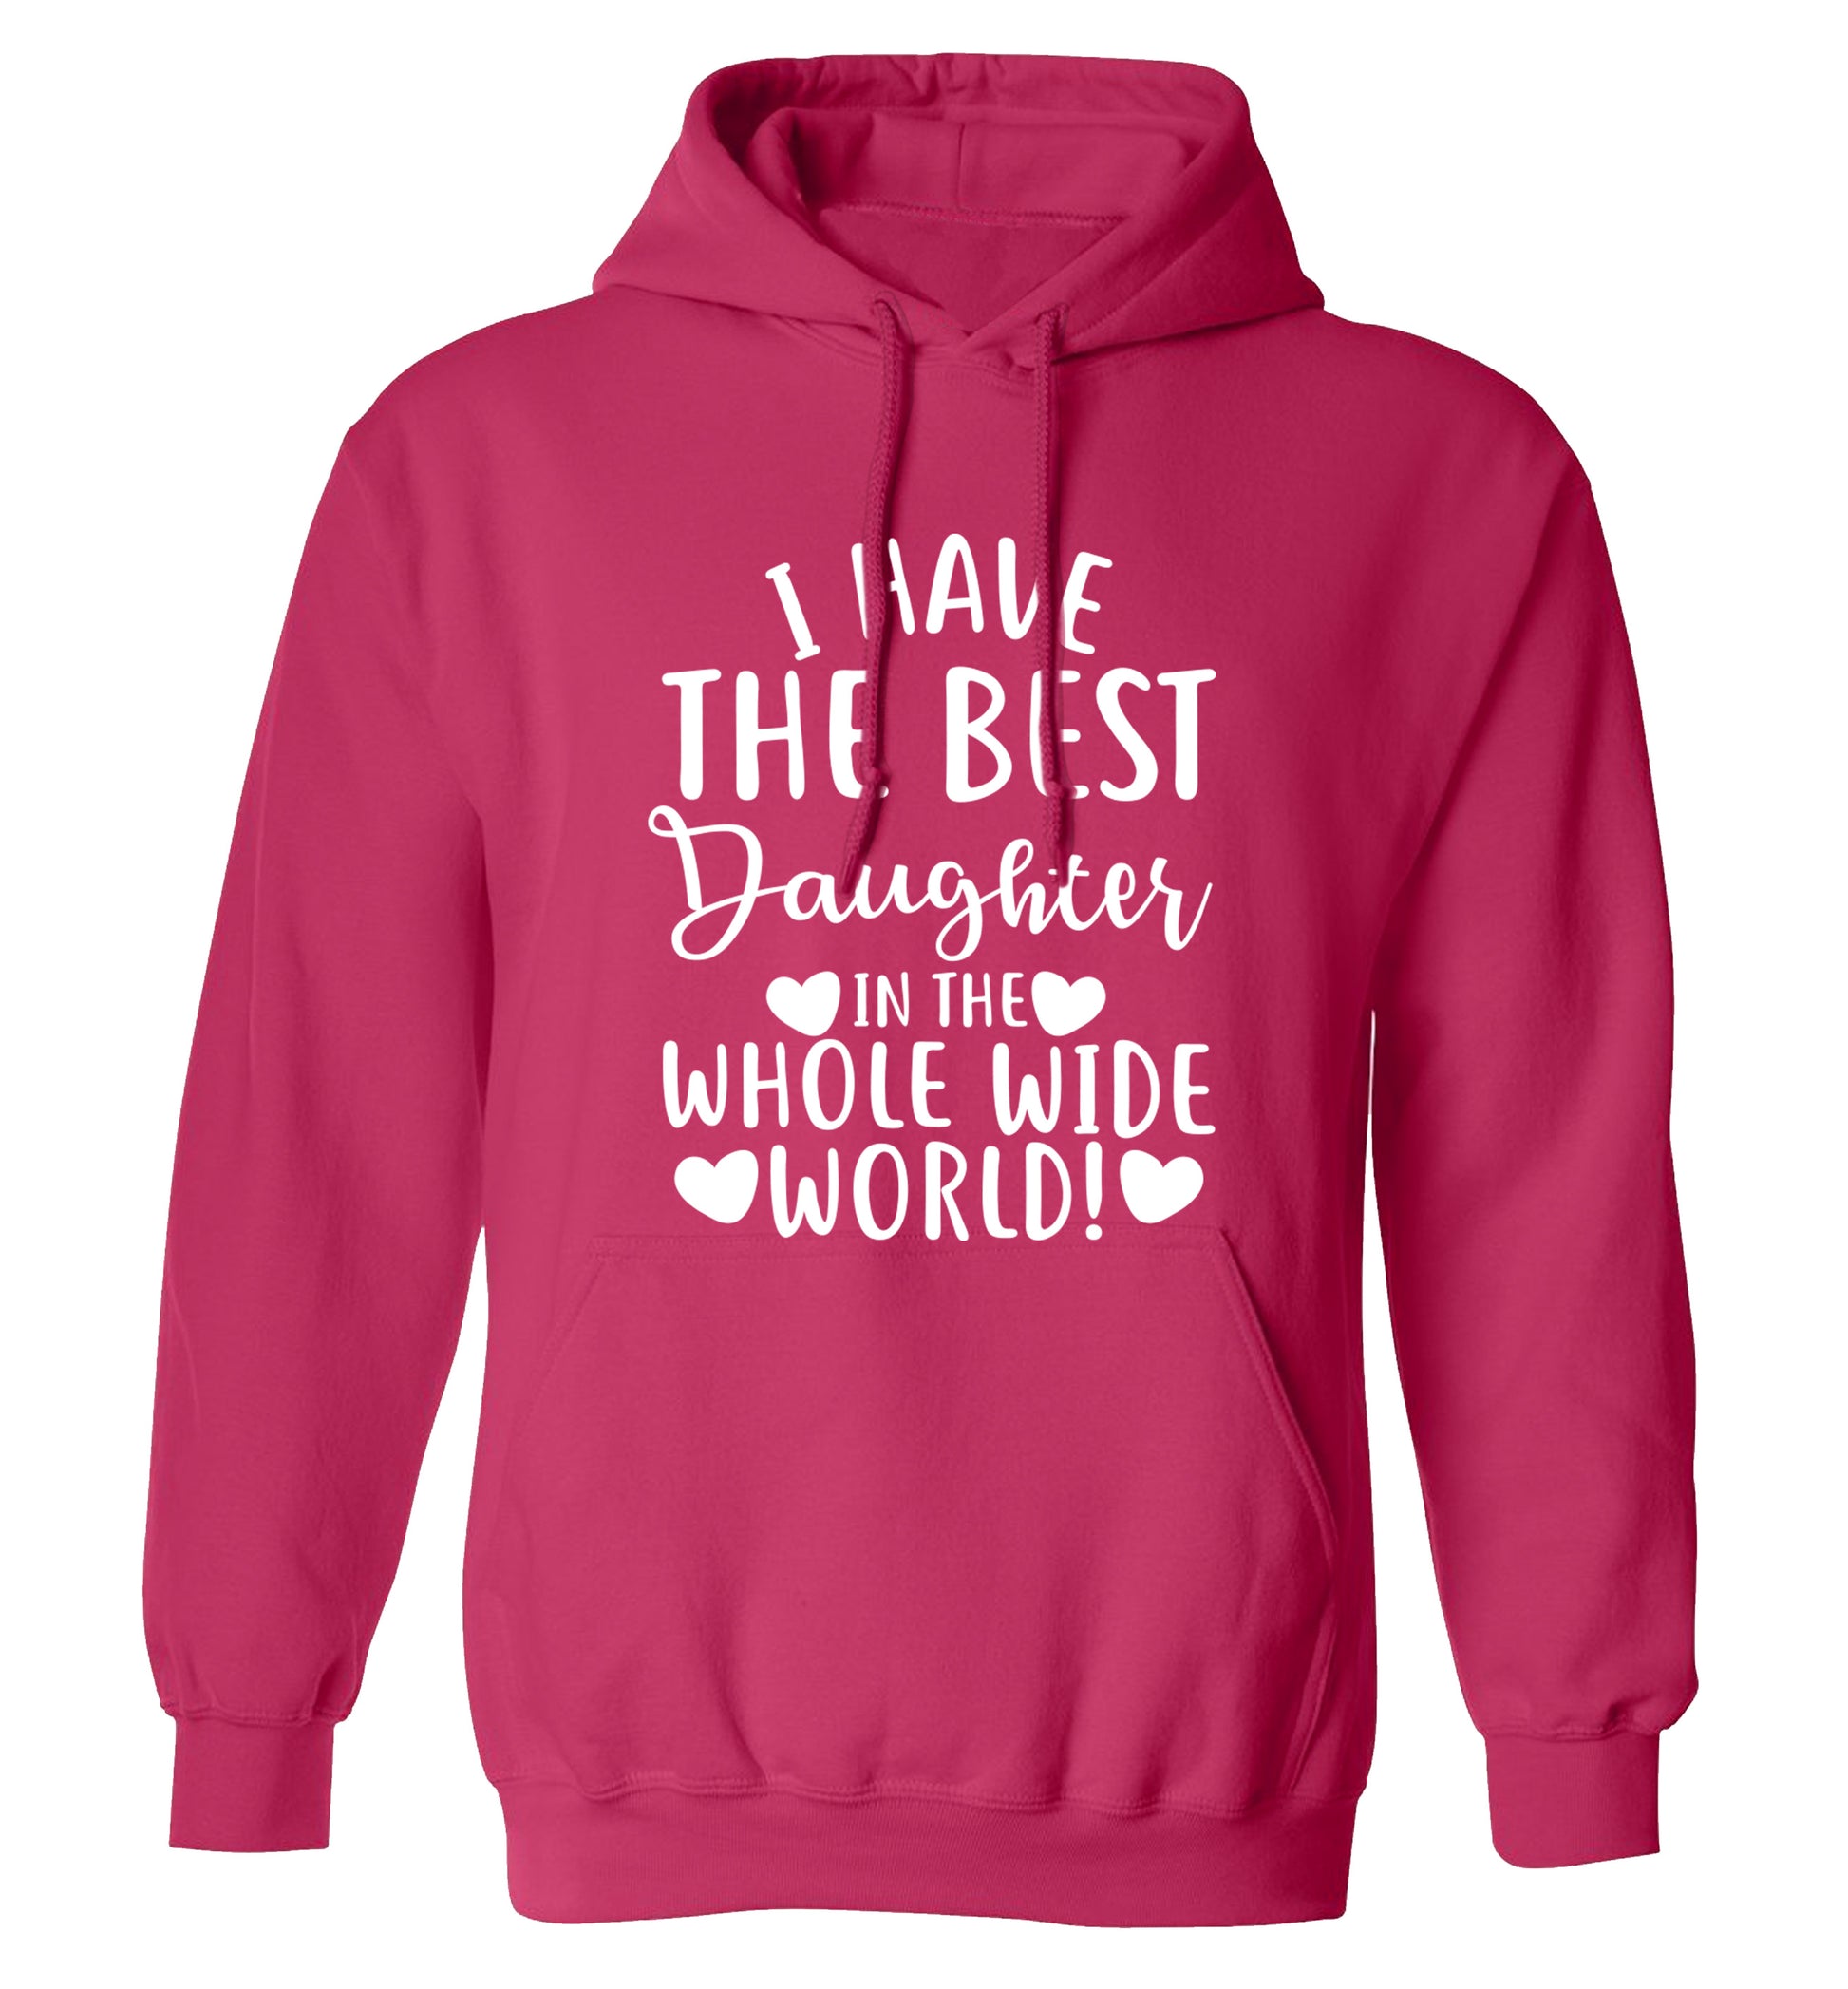 I have the best daughter in the whole wide world! adults unisex pink hoodie 2XL